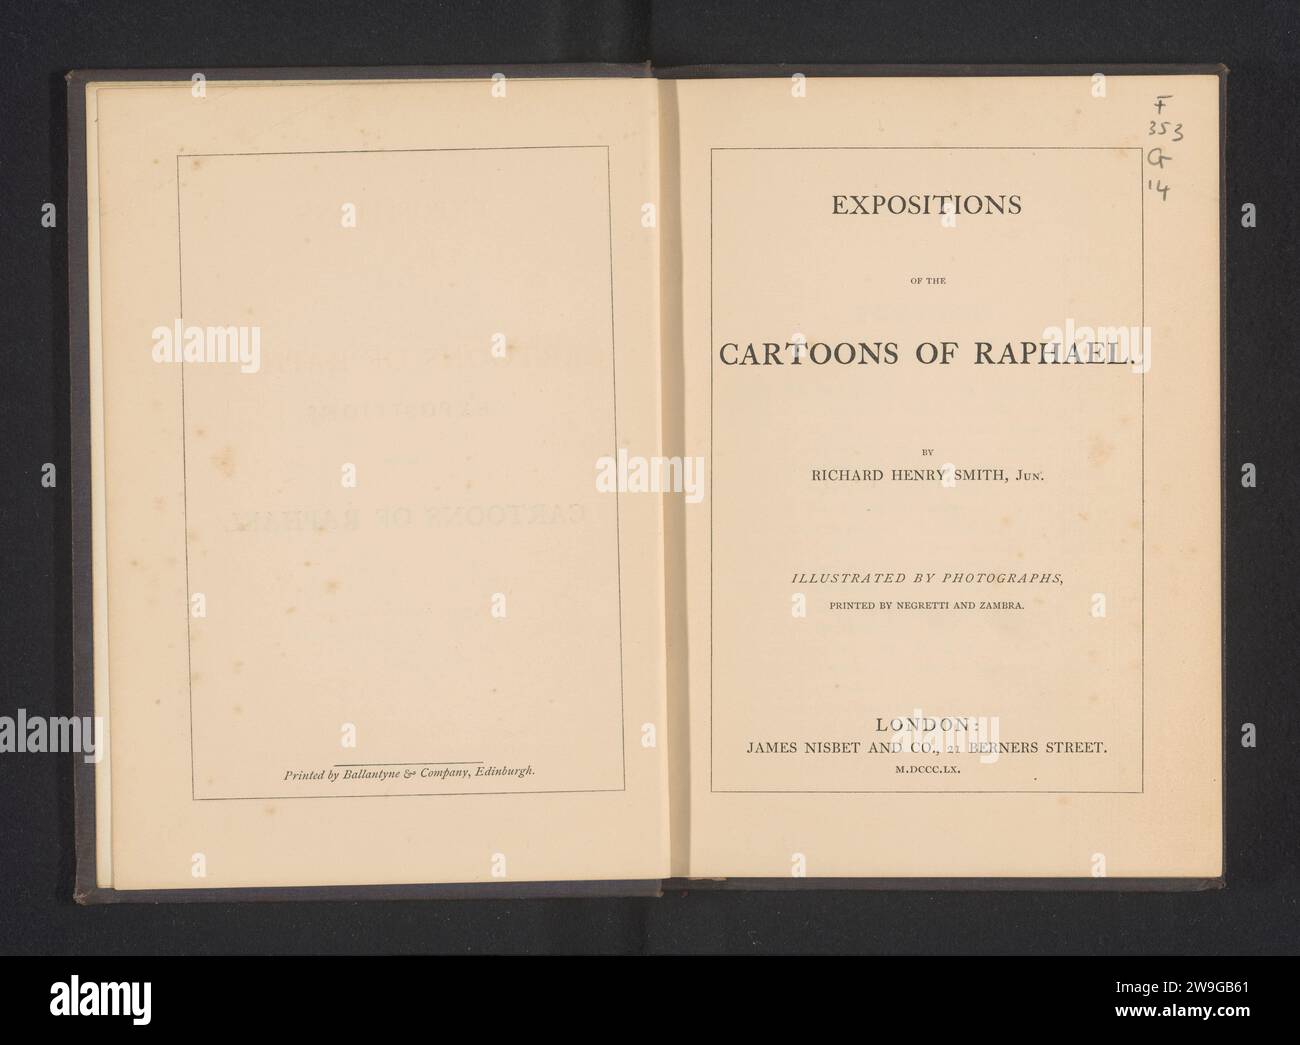 Expositions of the cartoons of Raphael, Richard Henry Smith, 1860 book  London paper. linen (material). cardboard. photographic support printing / albumen print Stock Photo